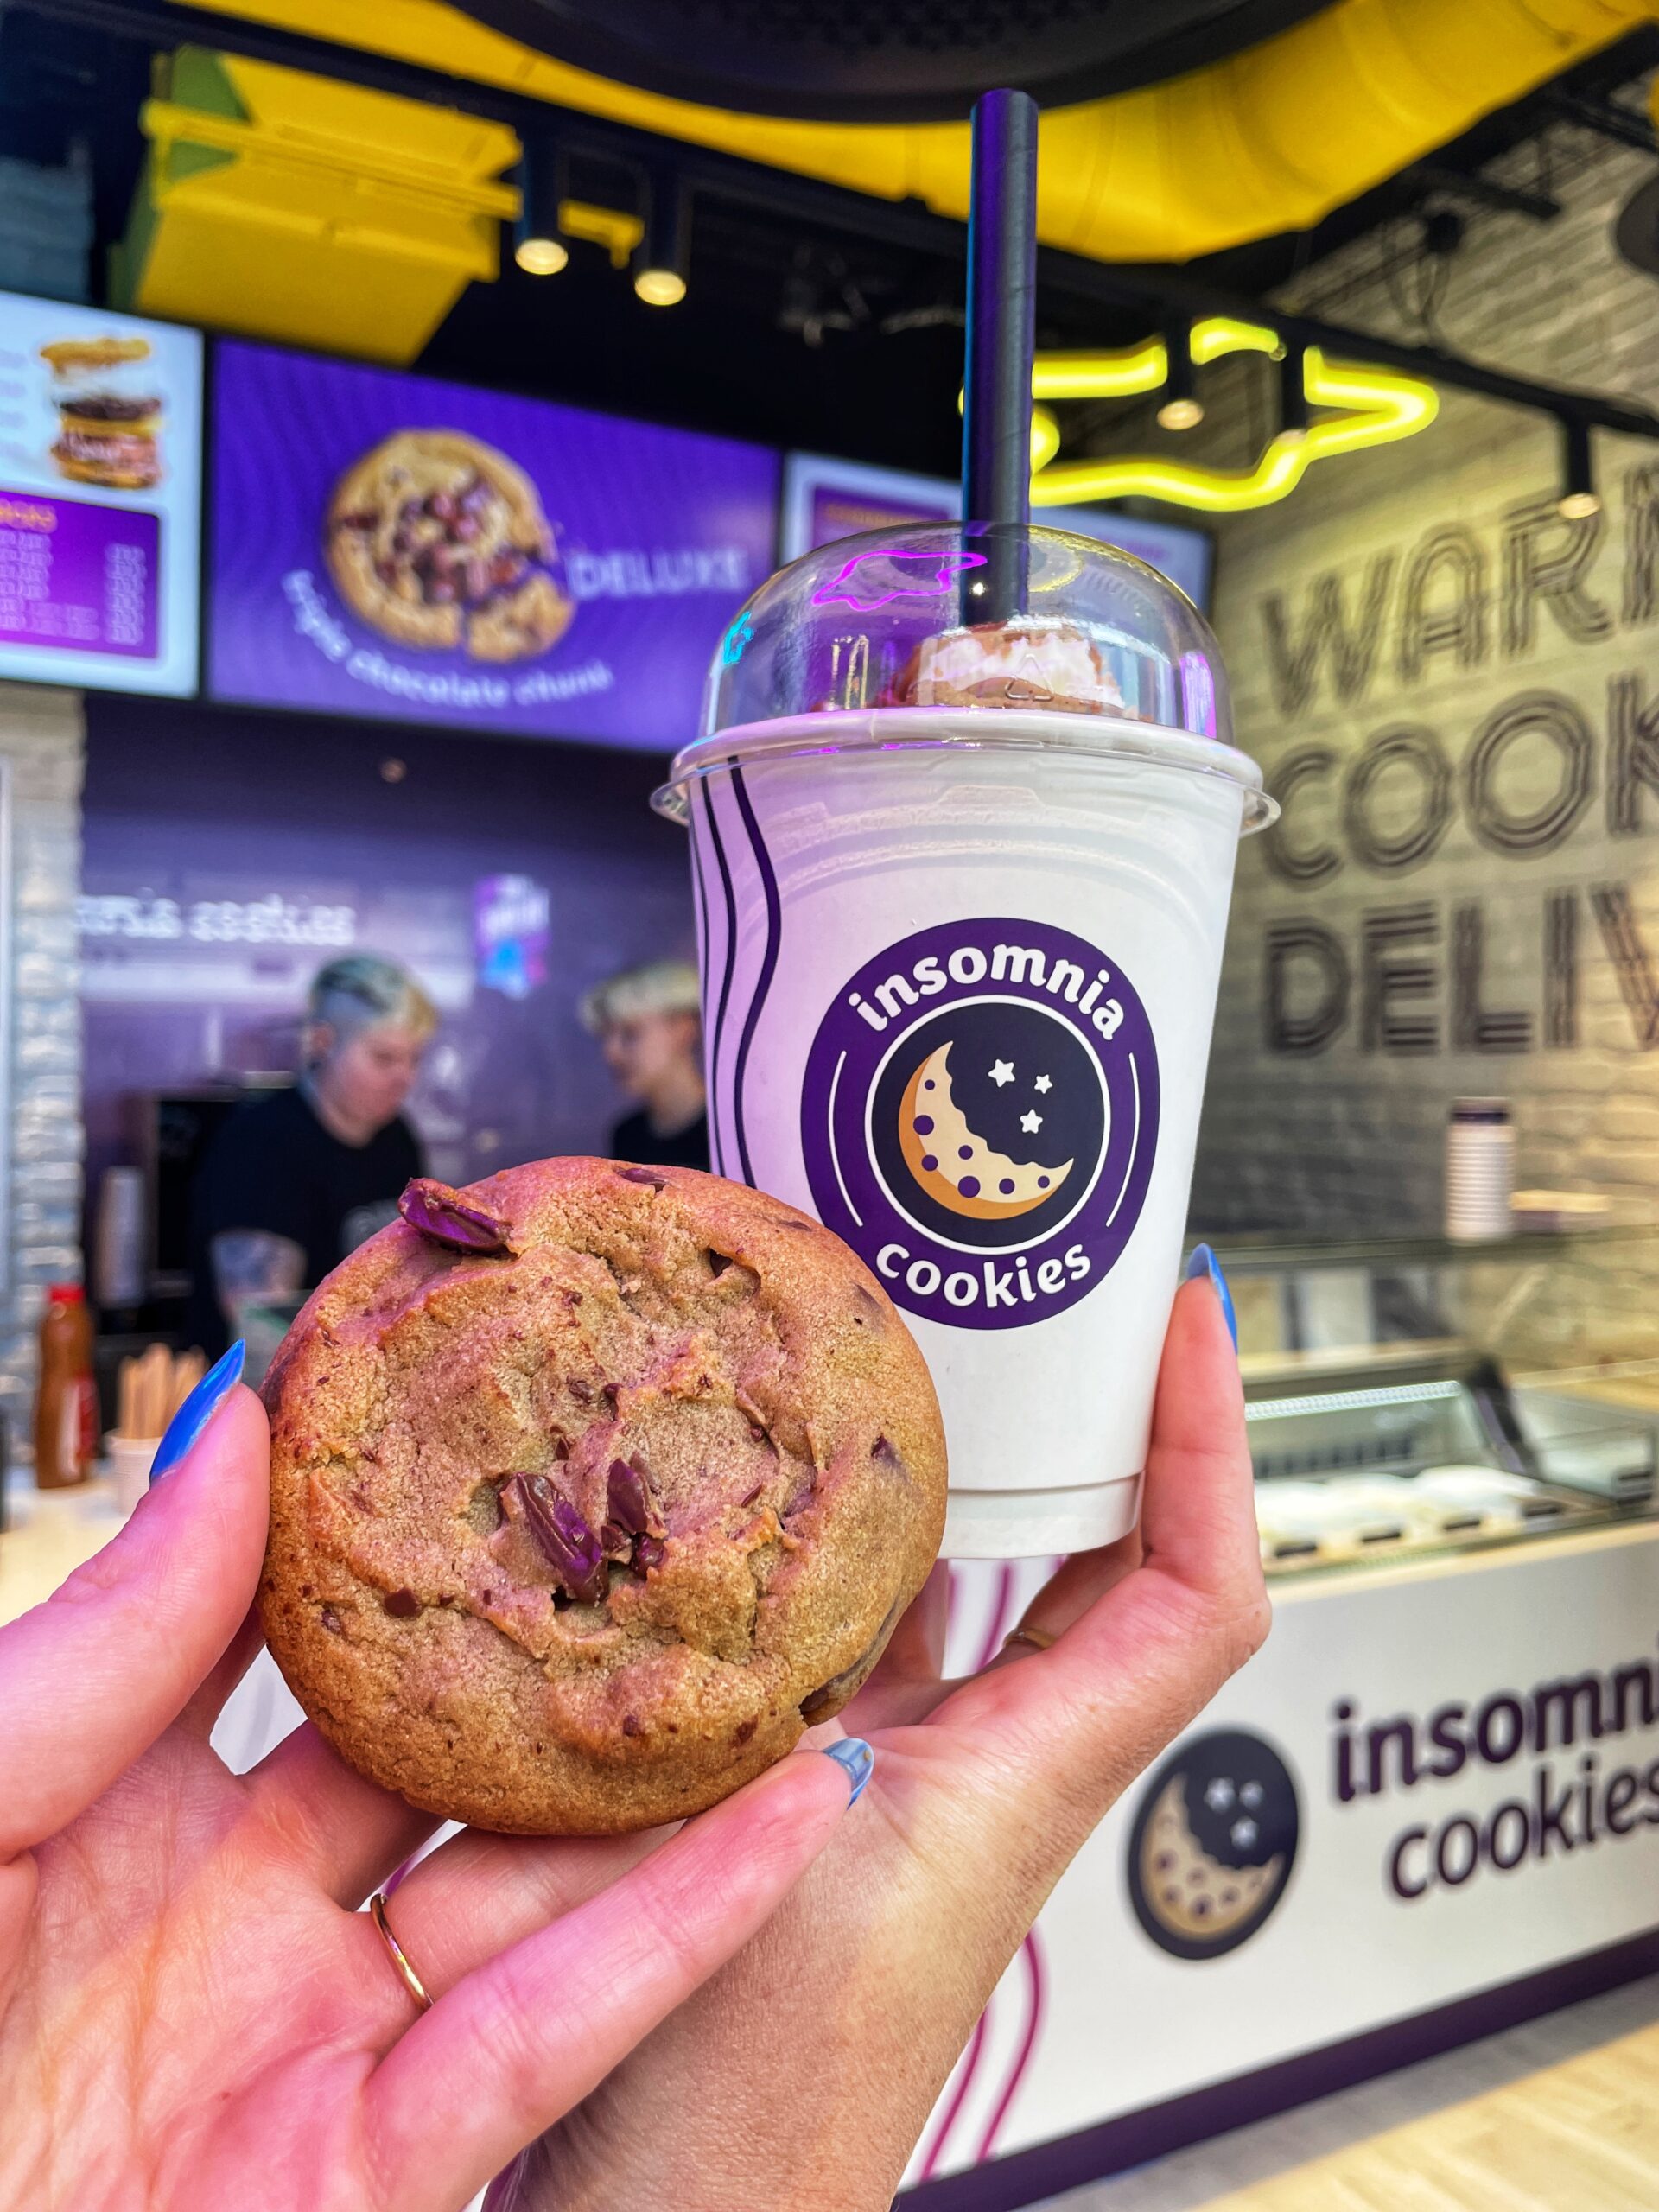 Warm cookies and a cookie shake inside the bakery.